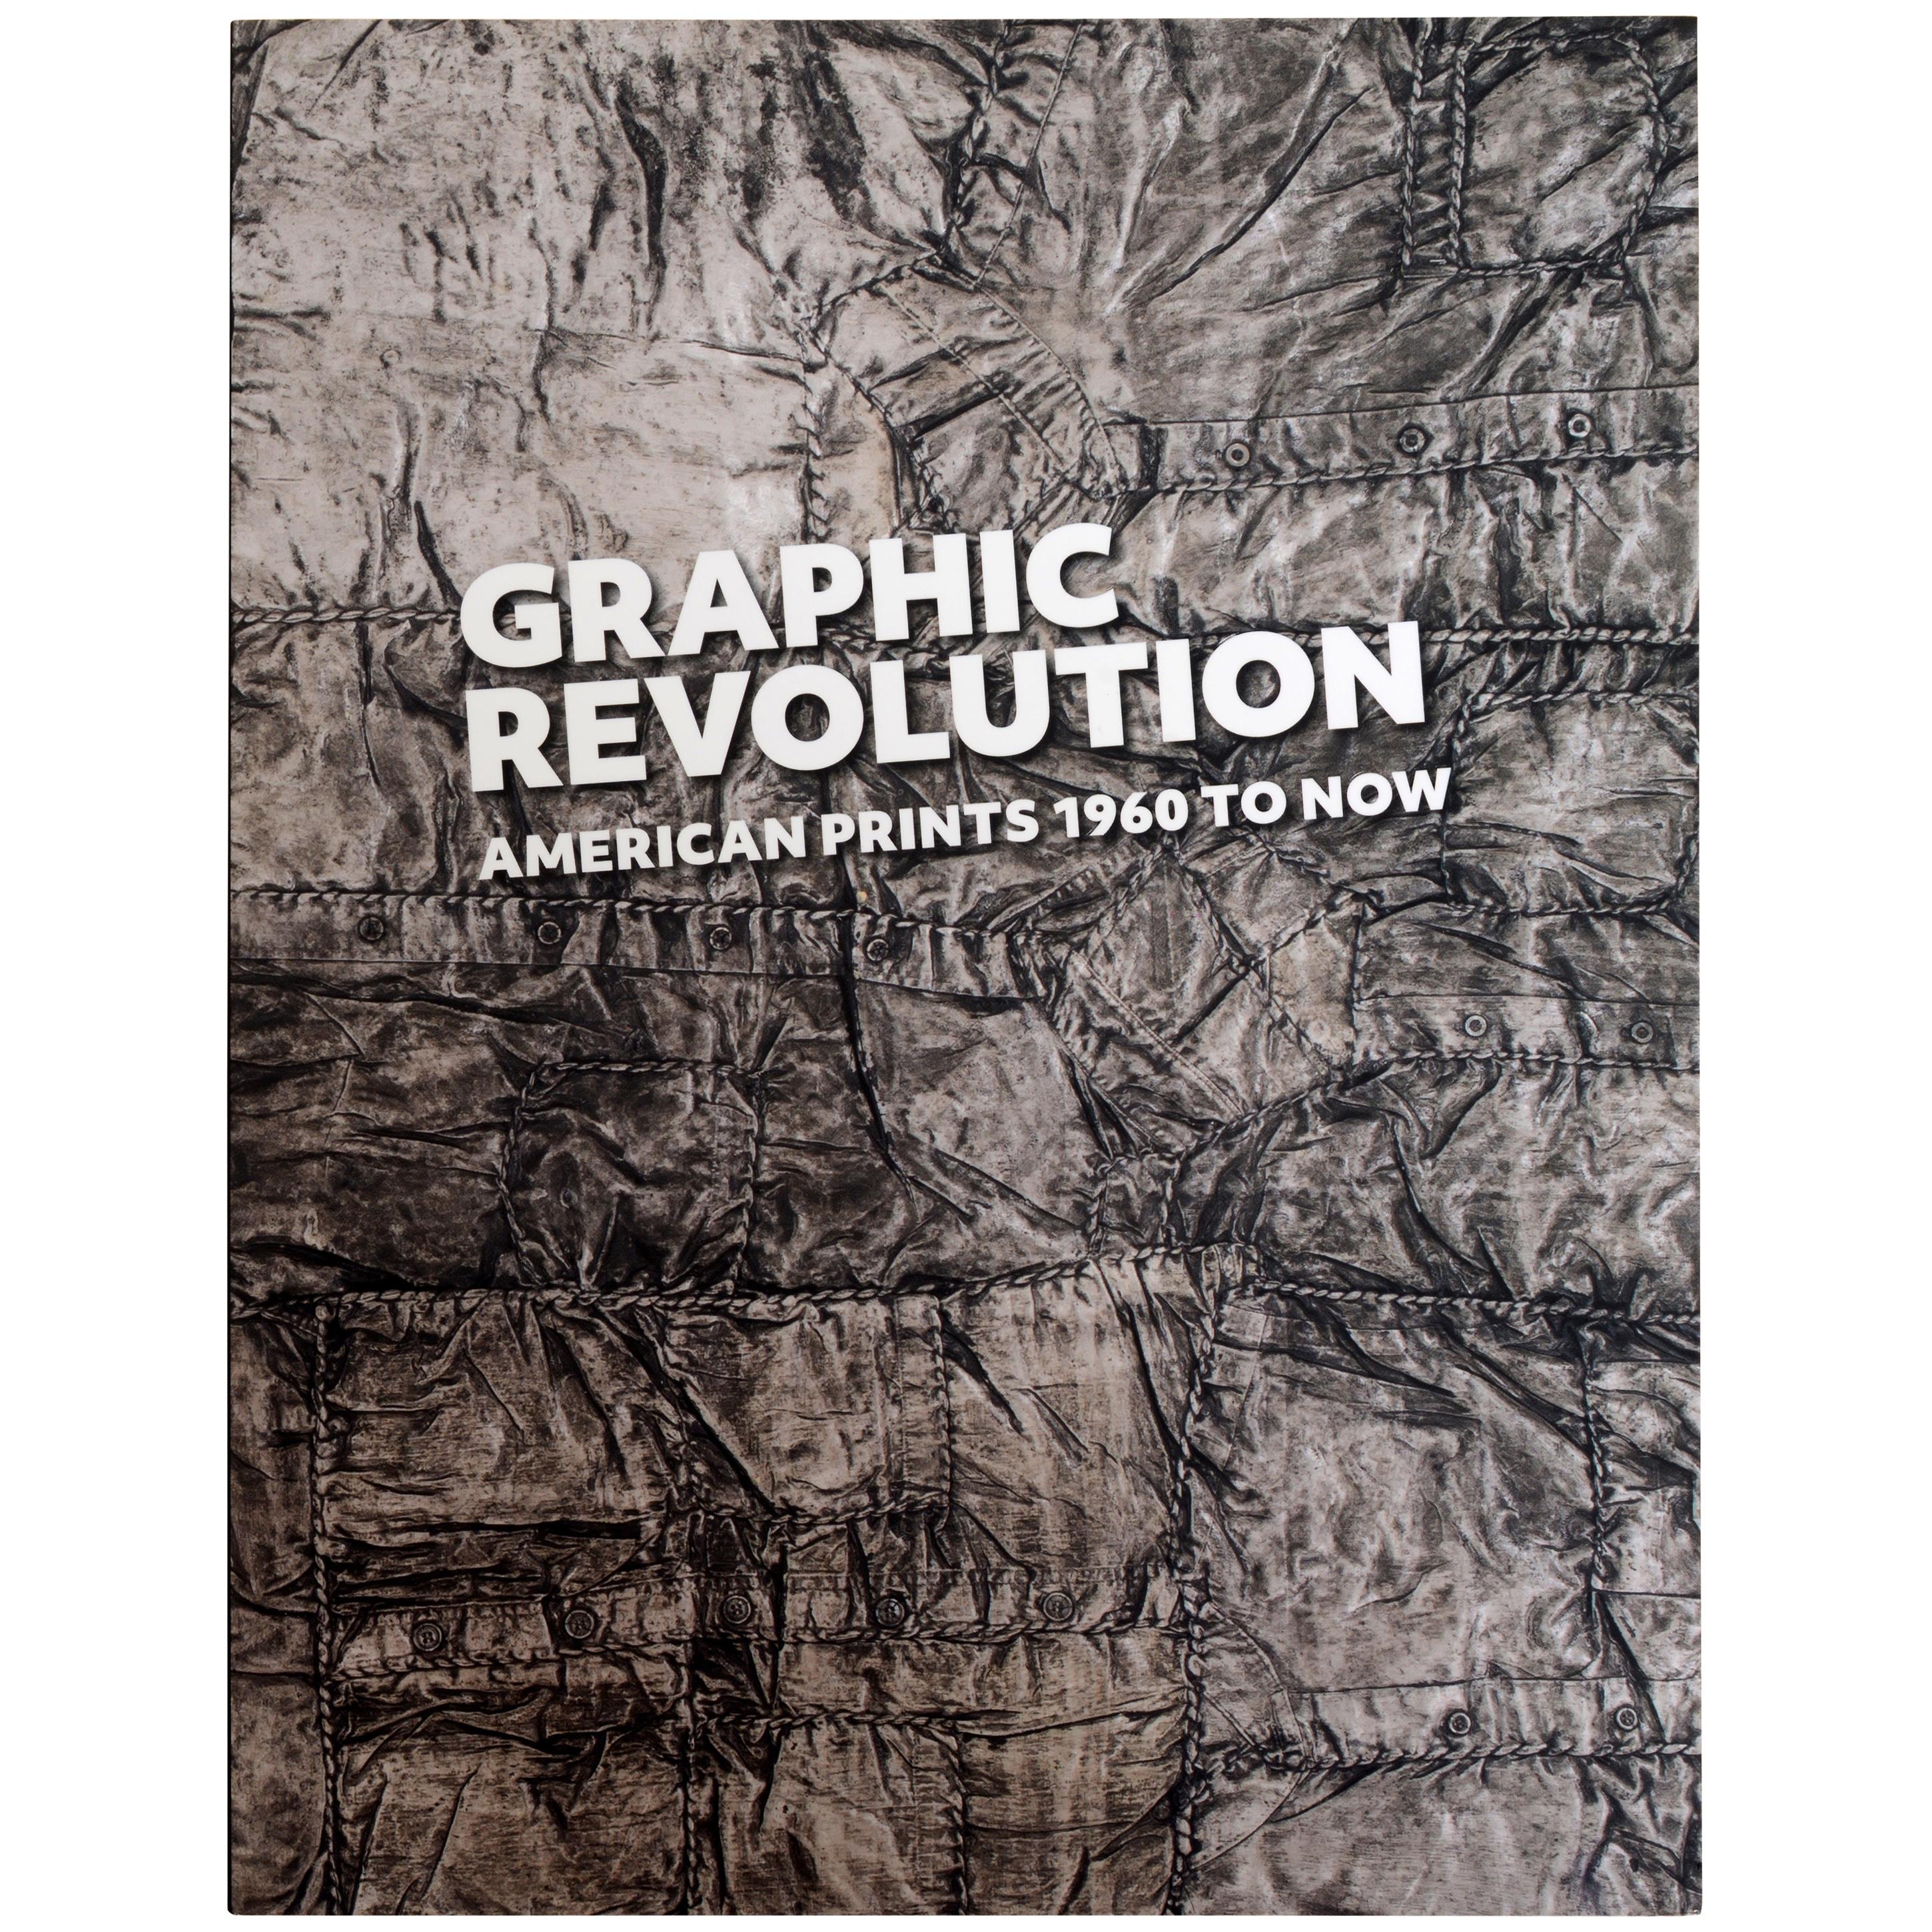 Graphic Revolution American Prints 1960 to Now by Elizabeth Wyckoff, 1st Ed For Sale